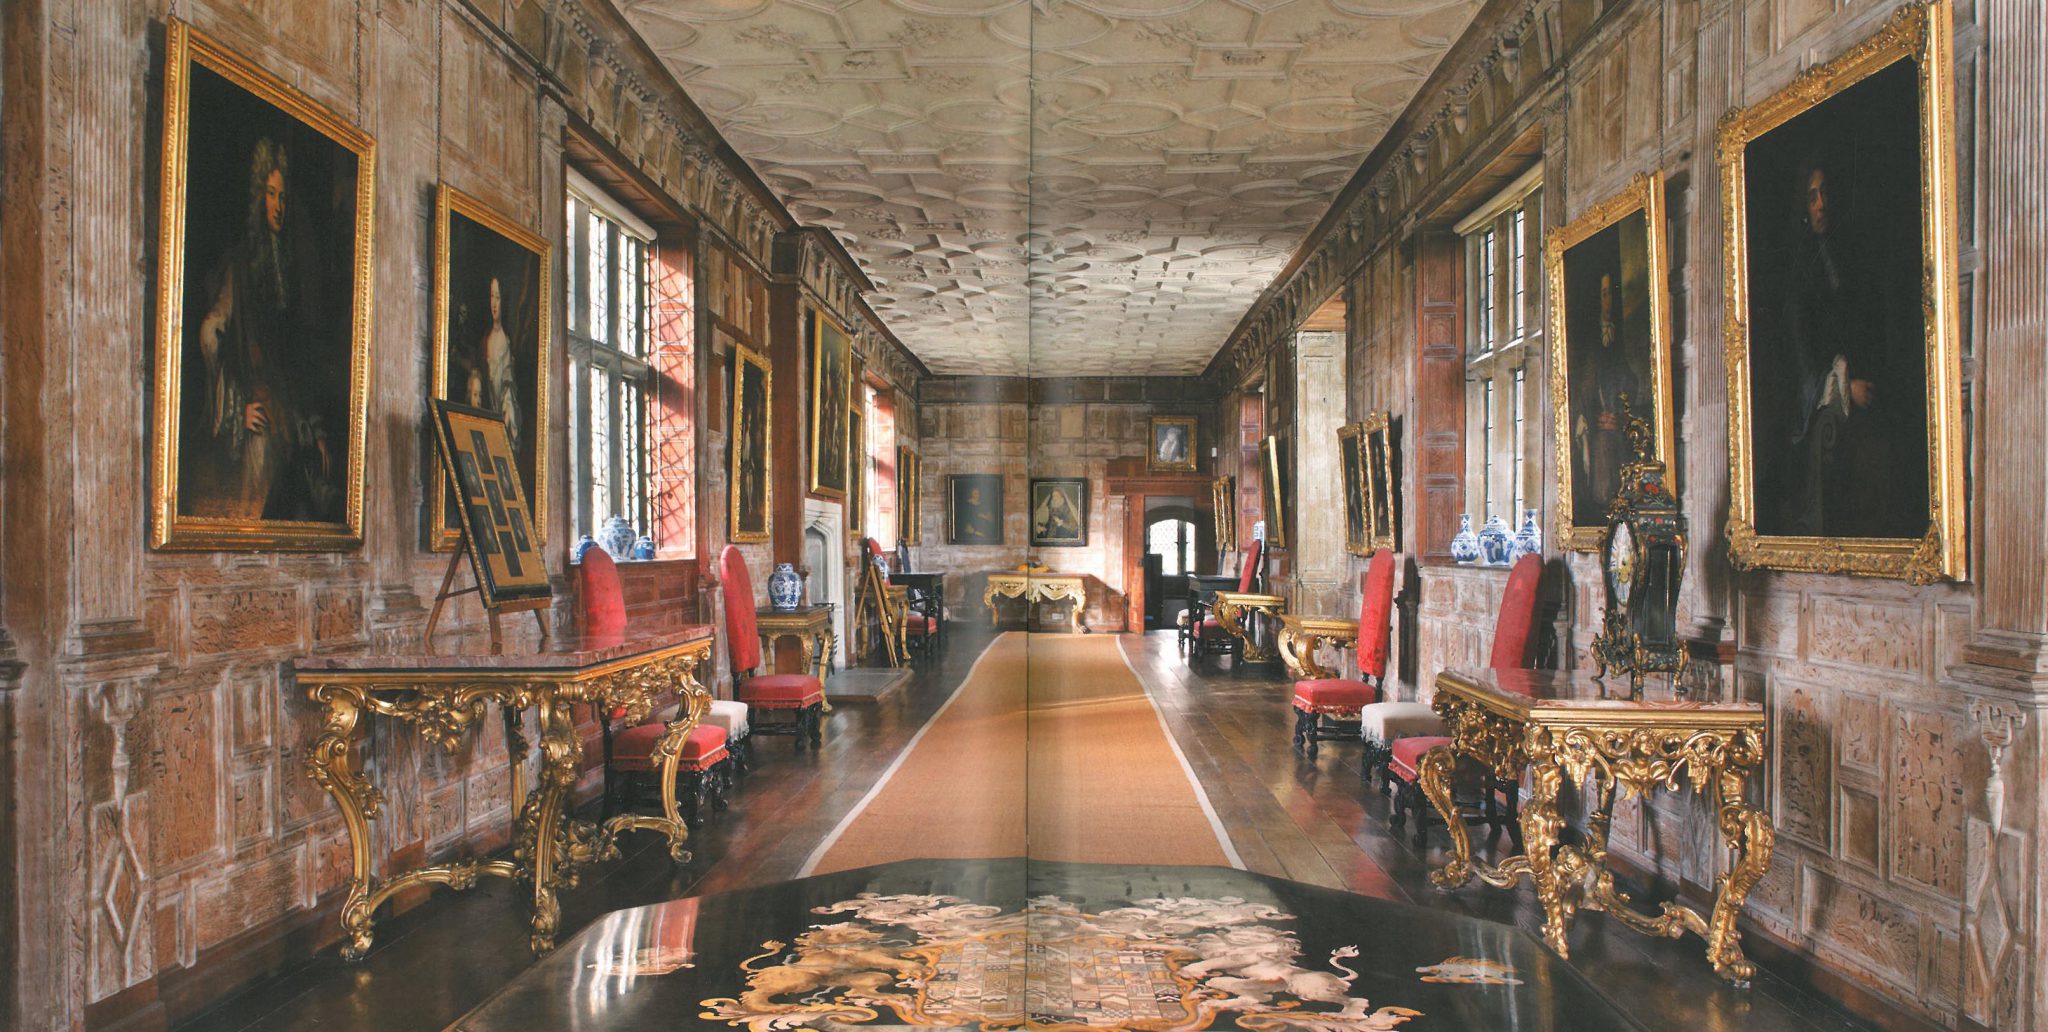 The Long Gallery. Image courtesy of Penshurst Place.